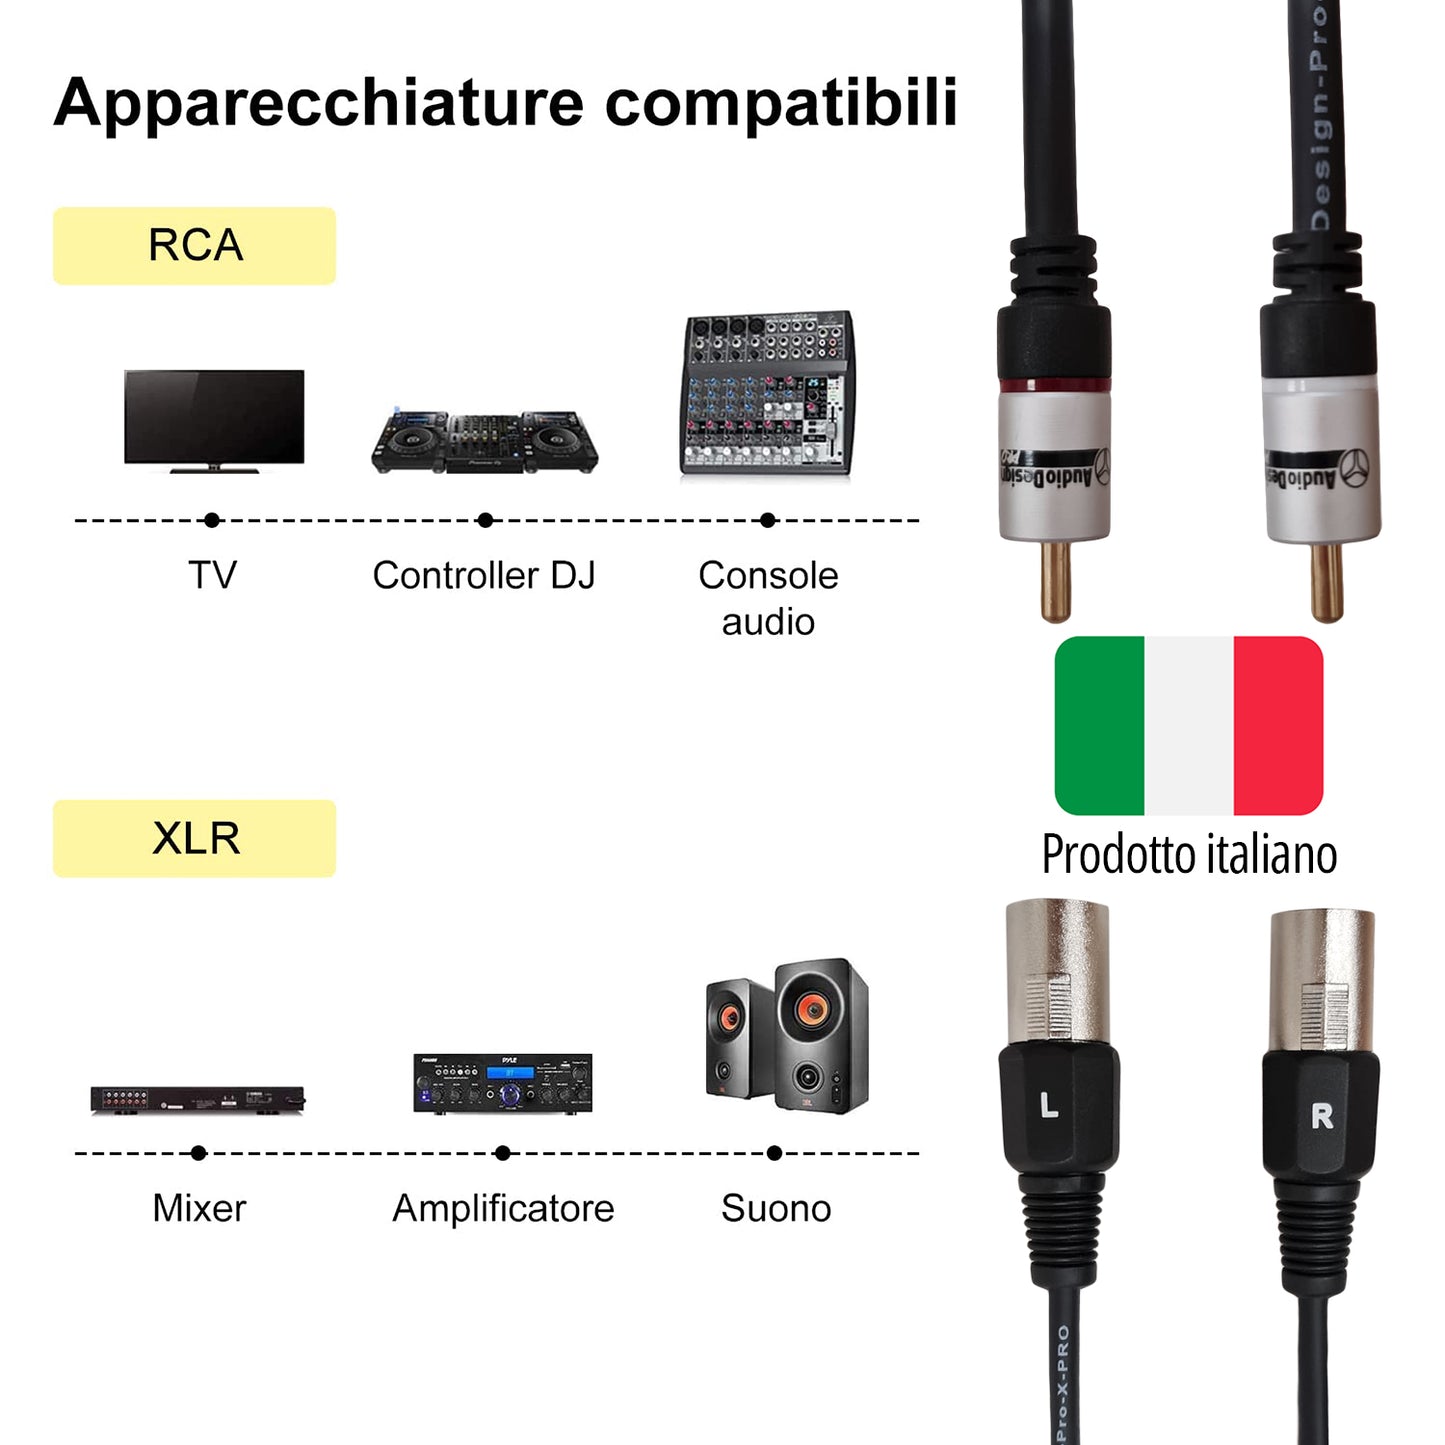 AudioDesign PRO X-Pro line VX211 Double adapter cable from RCA male to Jack 6.3 male, 1.5 meter interconnection cable, stereo audio connection